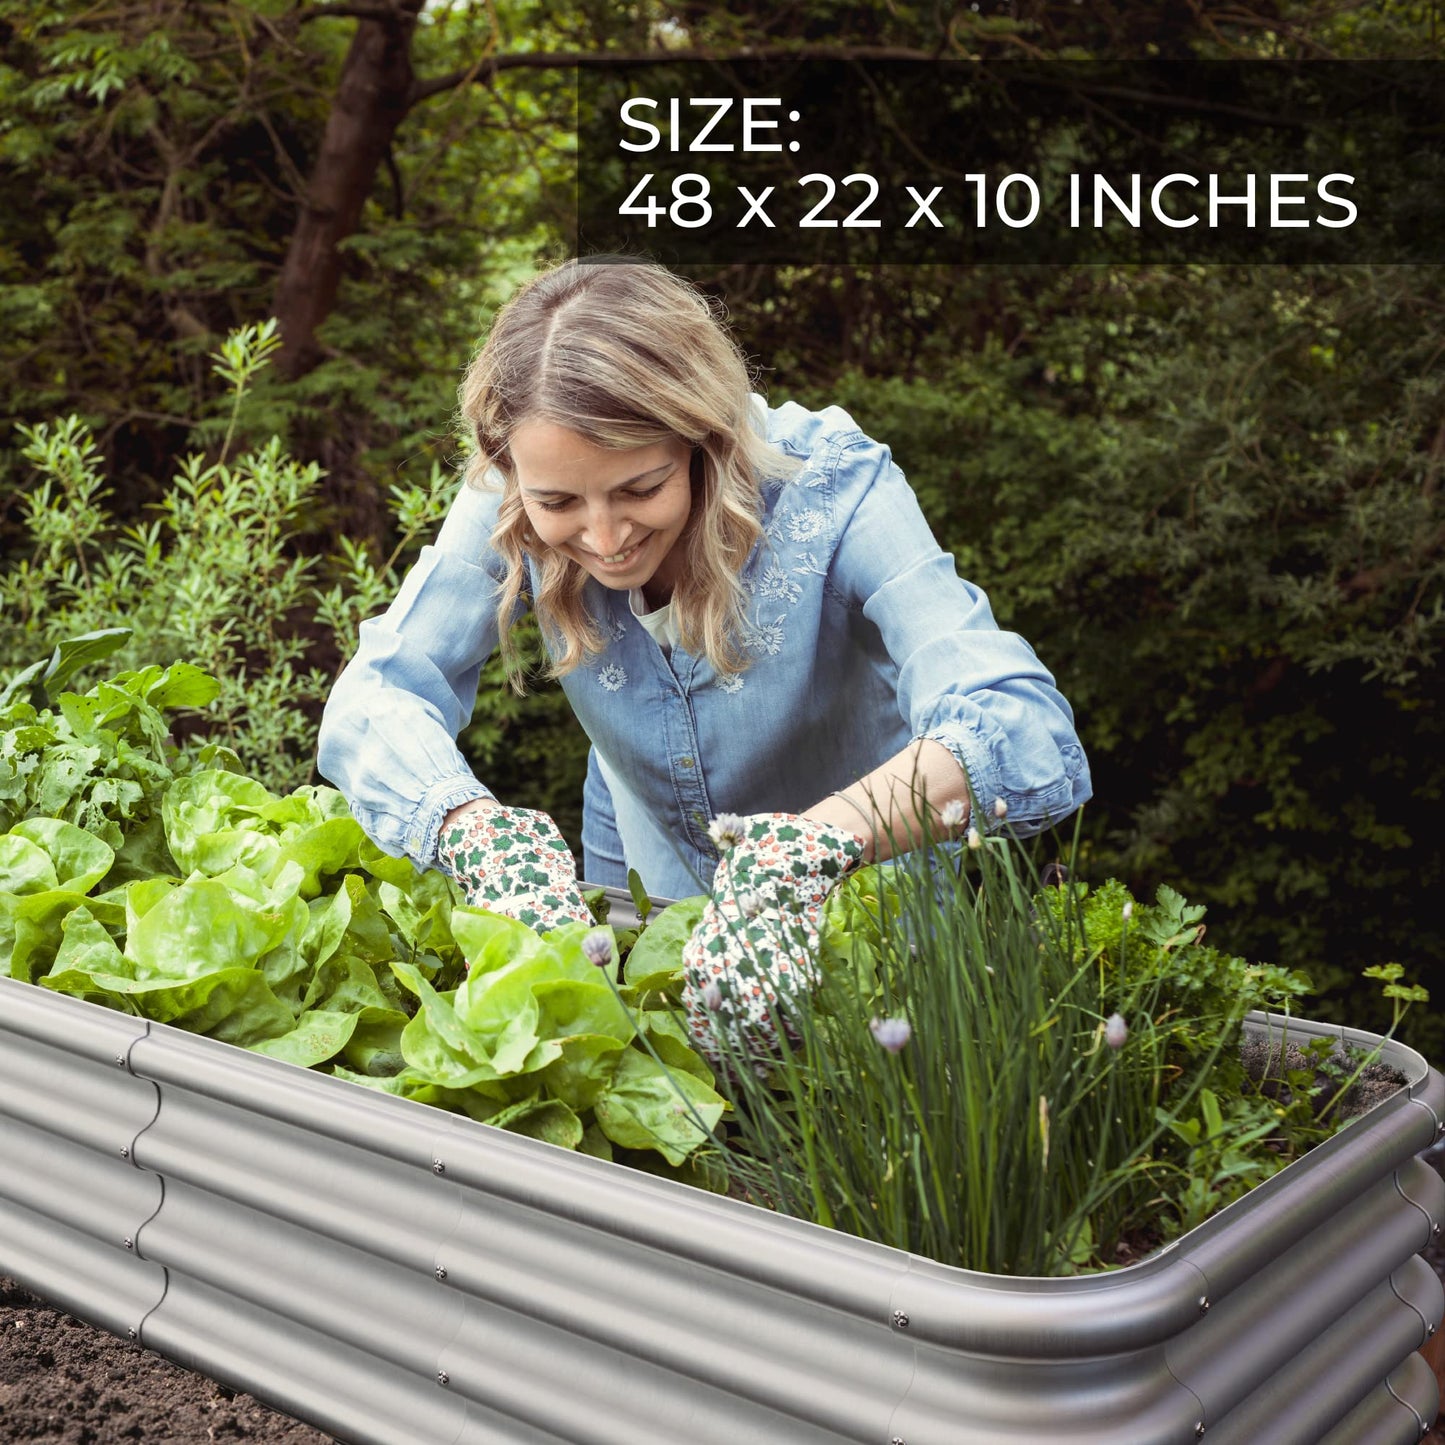 ZICOTO Premium Raised Garden Bed for Outdoors - Sturdy and Easy to Assemble Galvanized Steel Planter Box - Versatile Metal Planter is Perfect to Grow Your Beautiful Herbs, Vegetables and Flowers